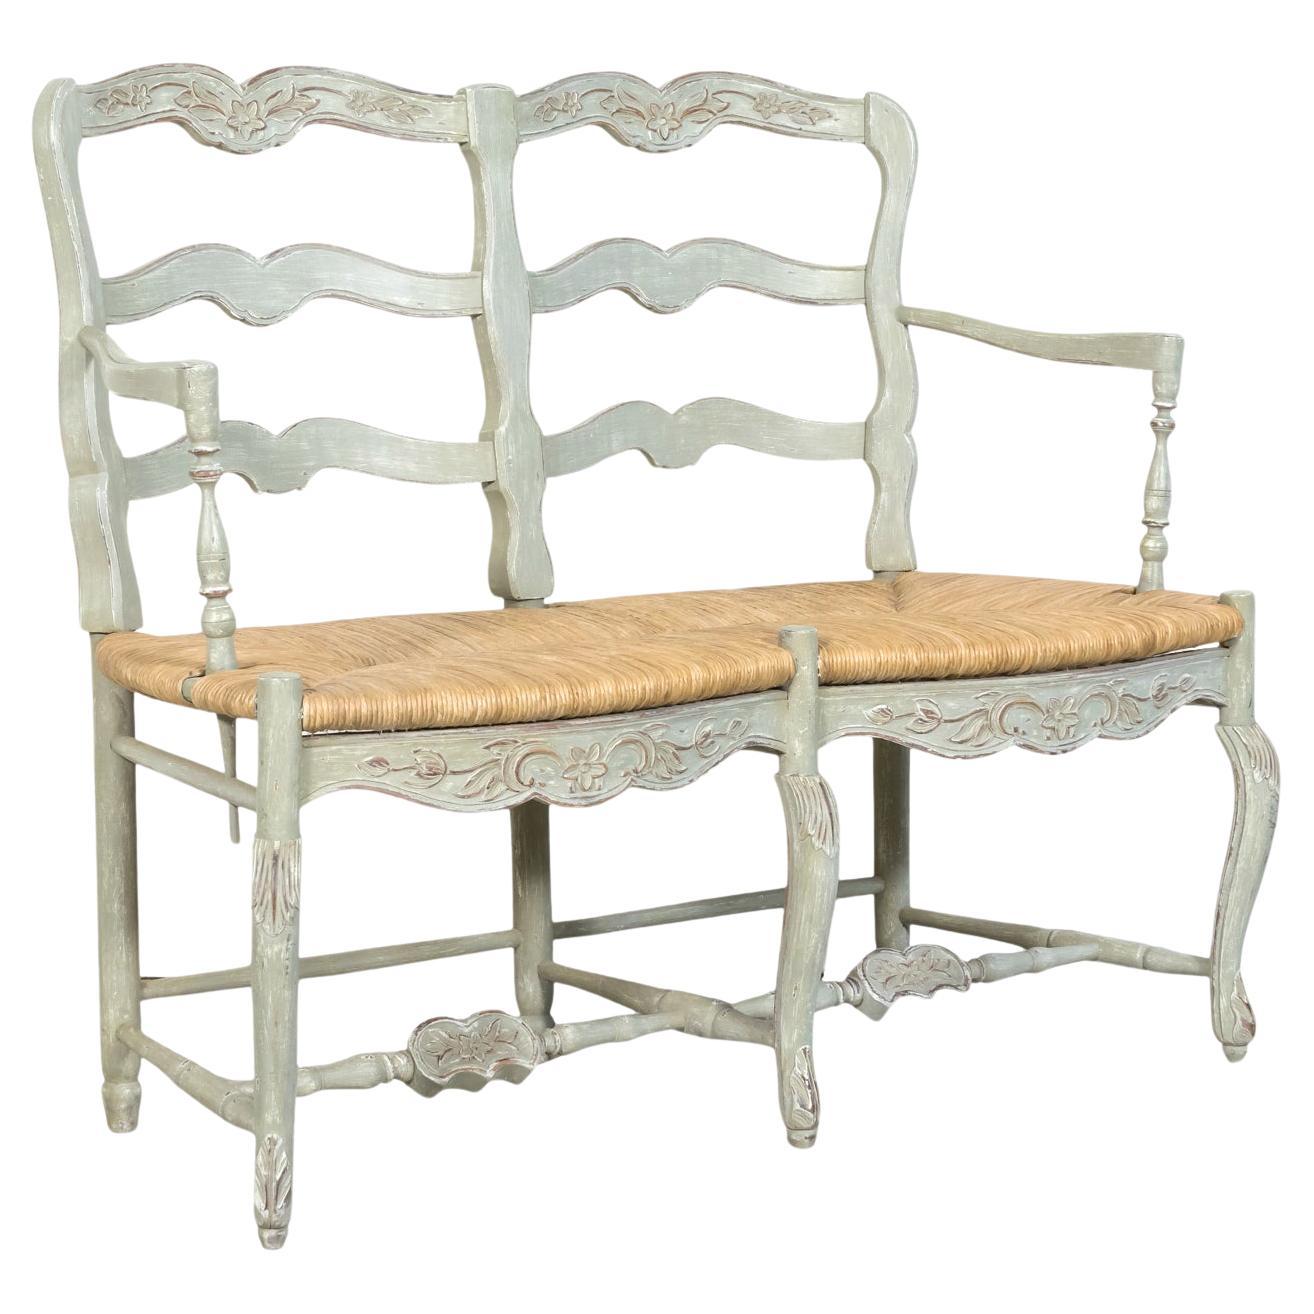 Antique French Provençal Louis XV Style Painted Settee or Radassier W/ Rush Seat For Sale